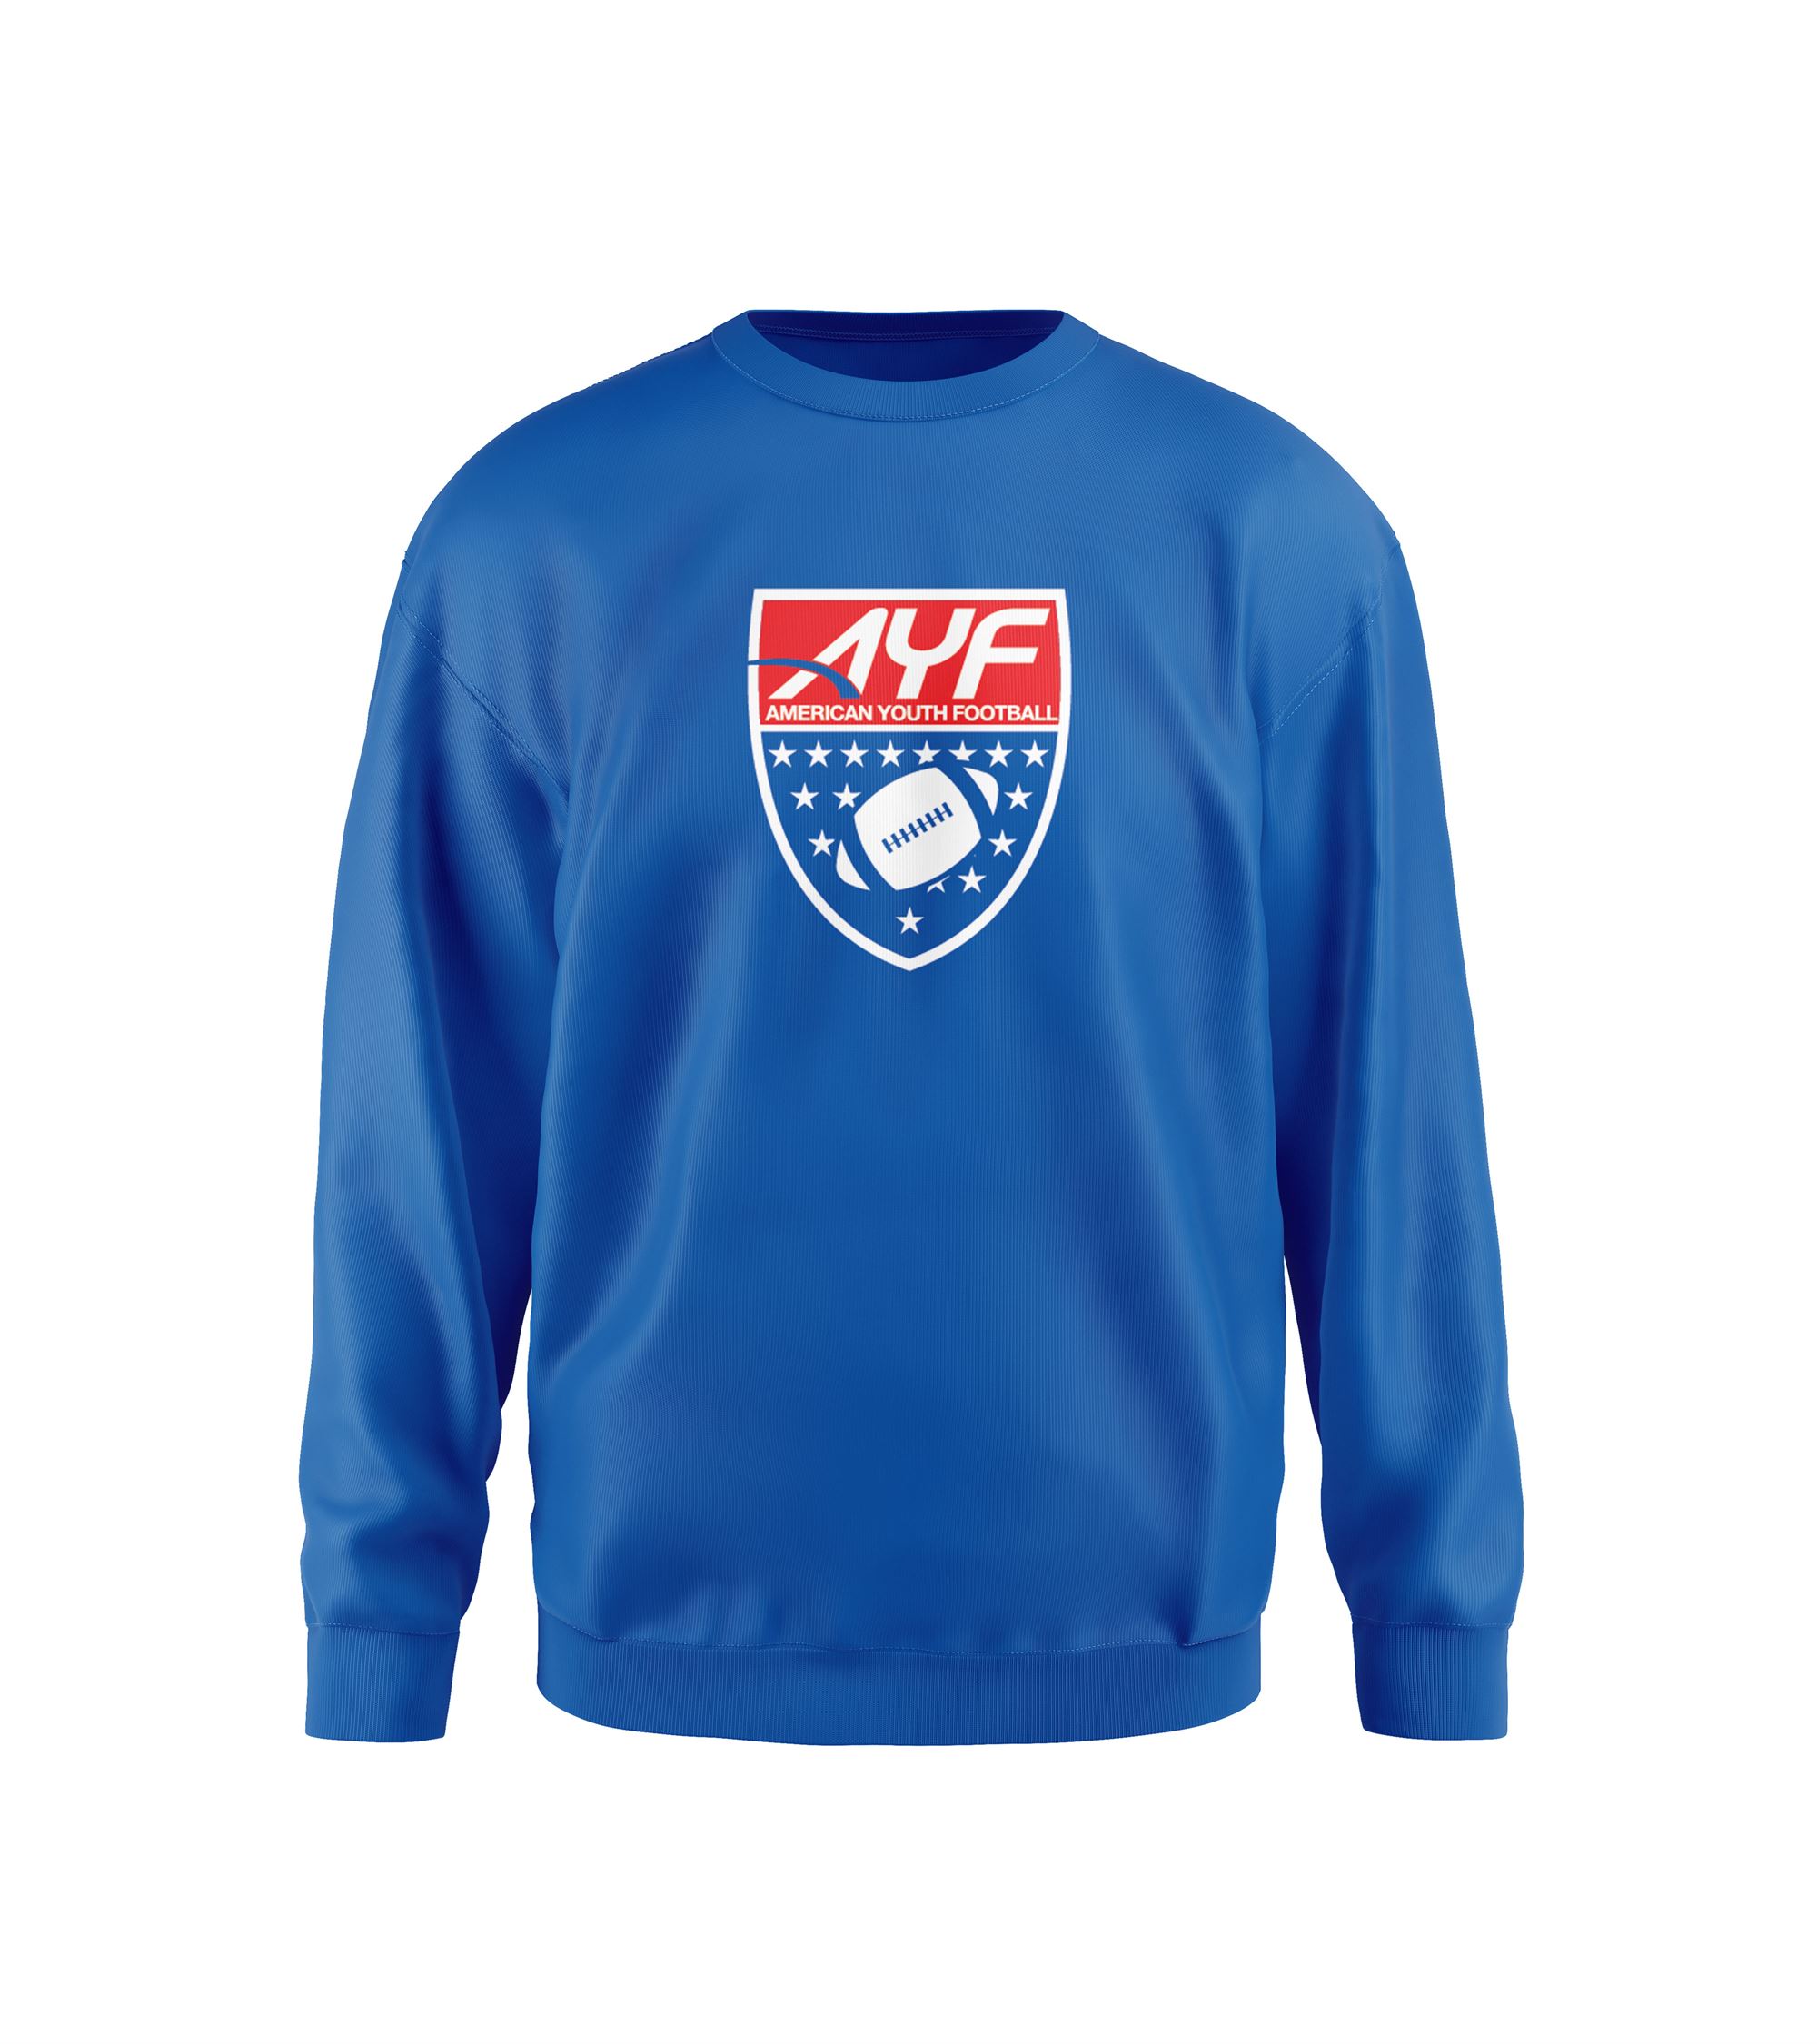 AYF Full Dye Sublimated Crew Neck Sweat Shirt (6 Colors)